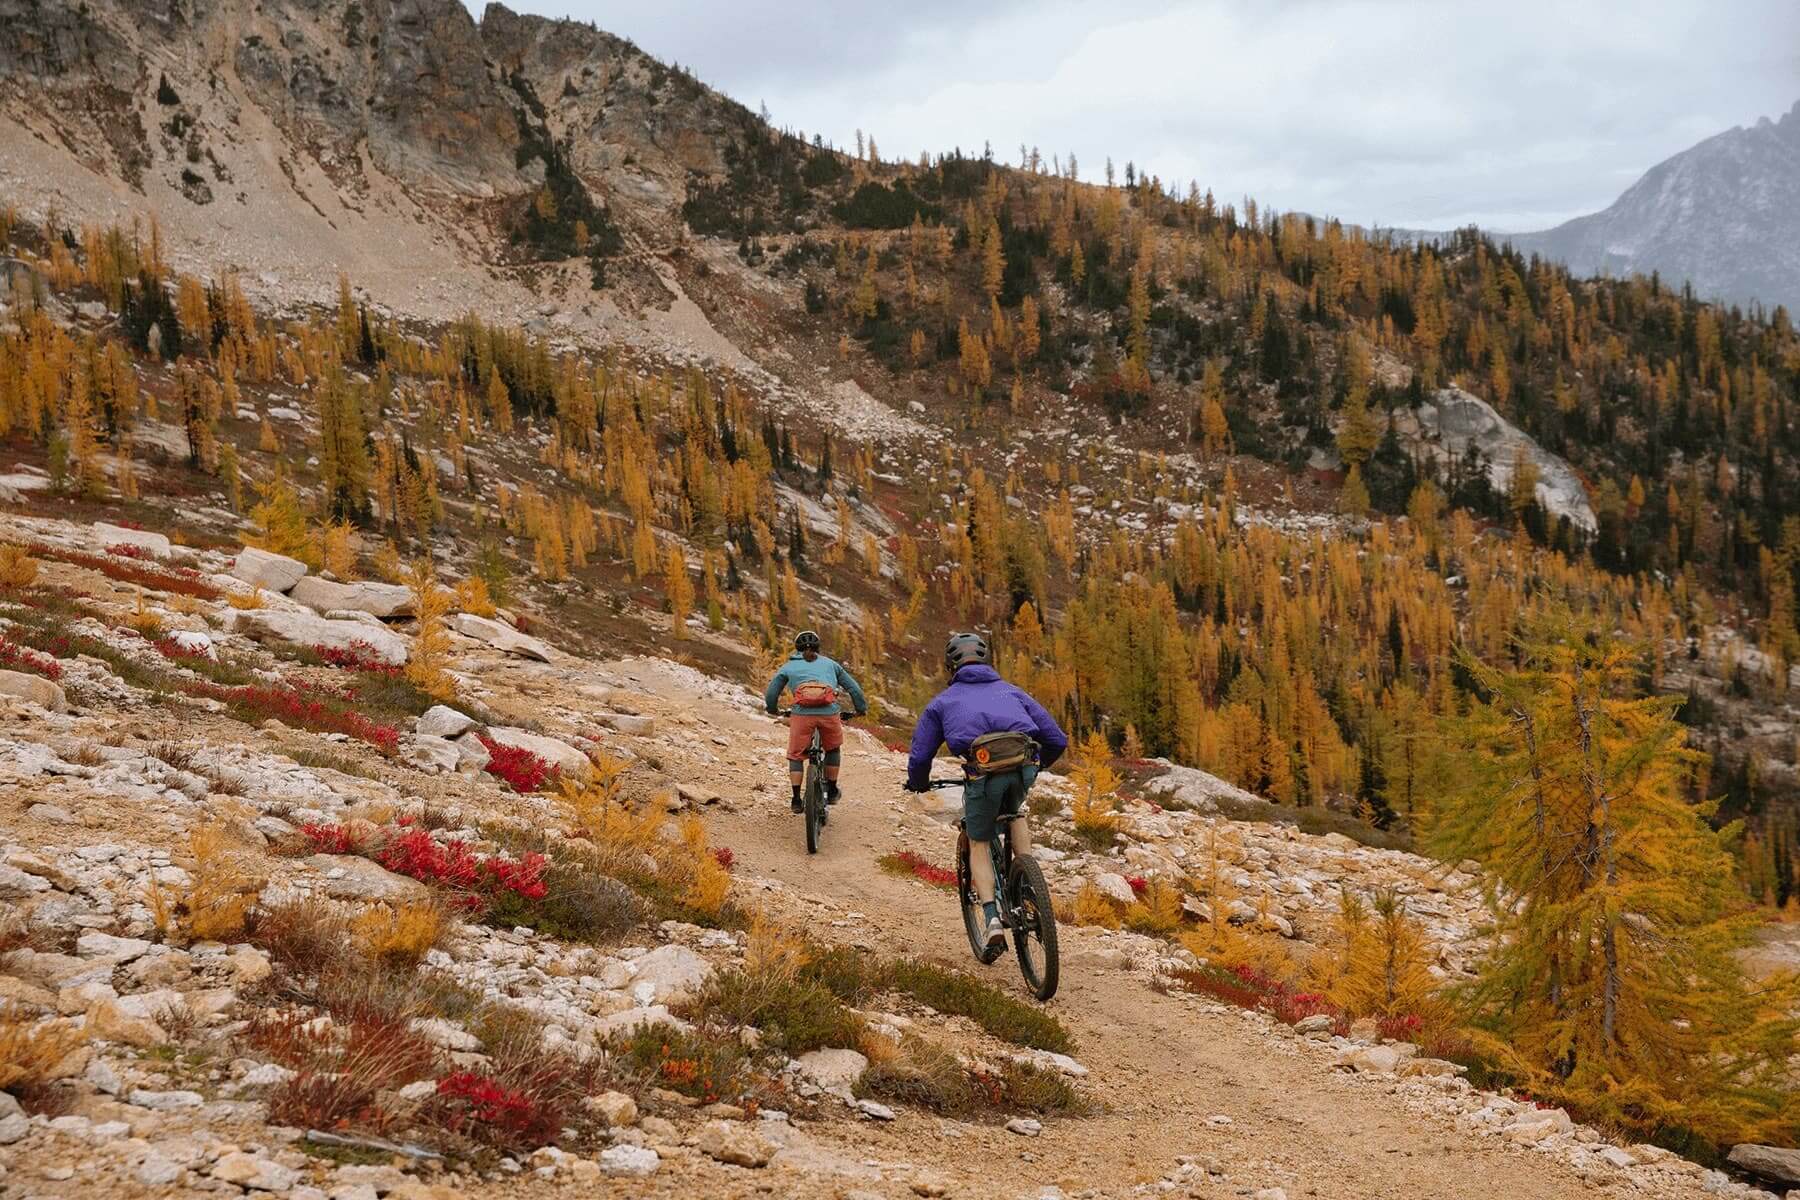 Mountain biking in the Methow Valley